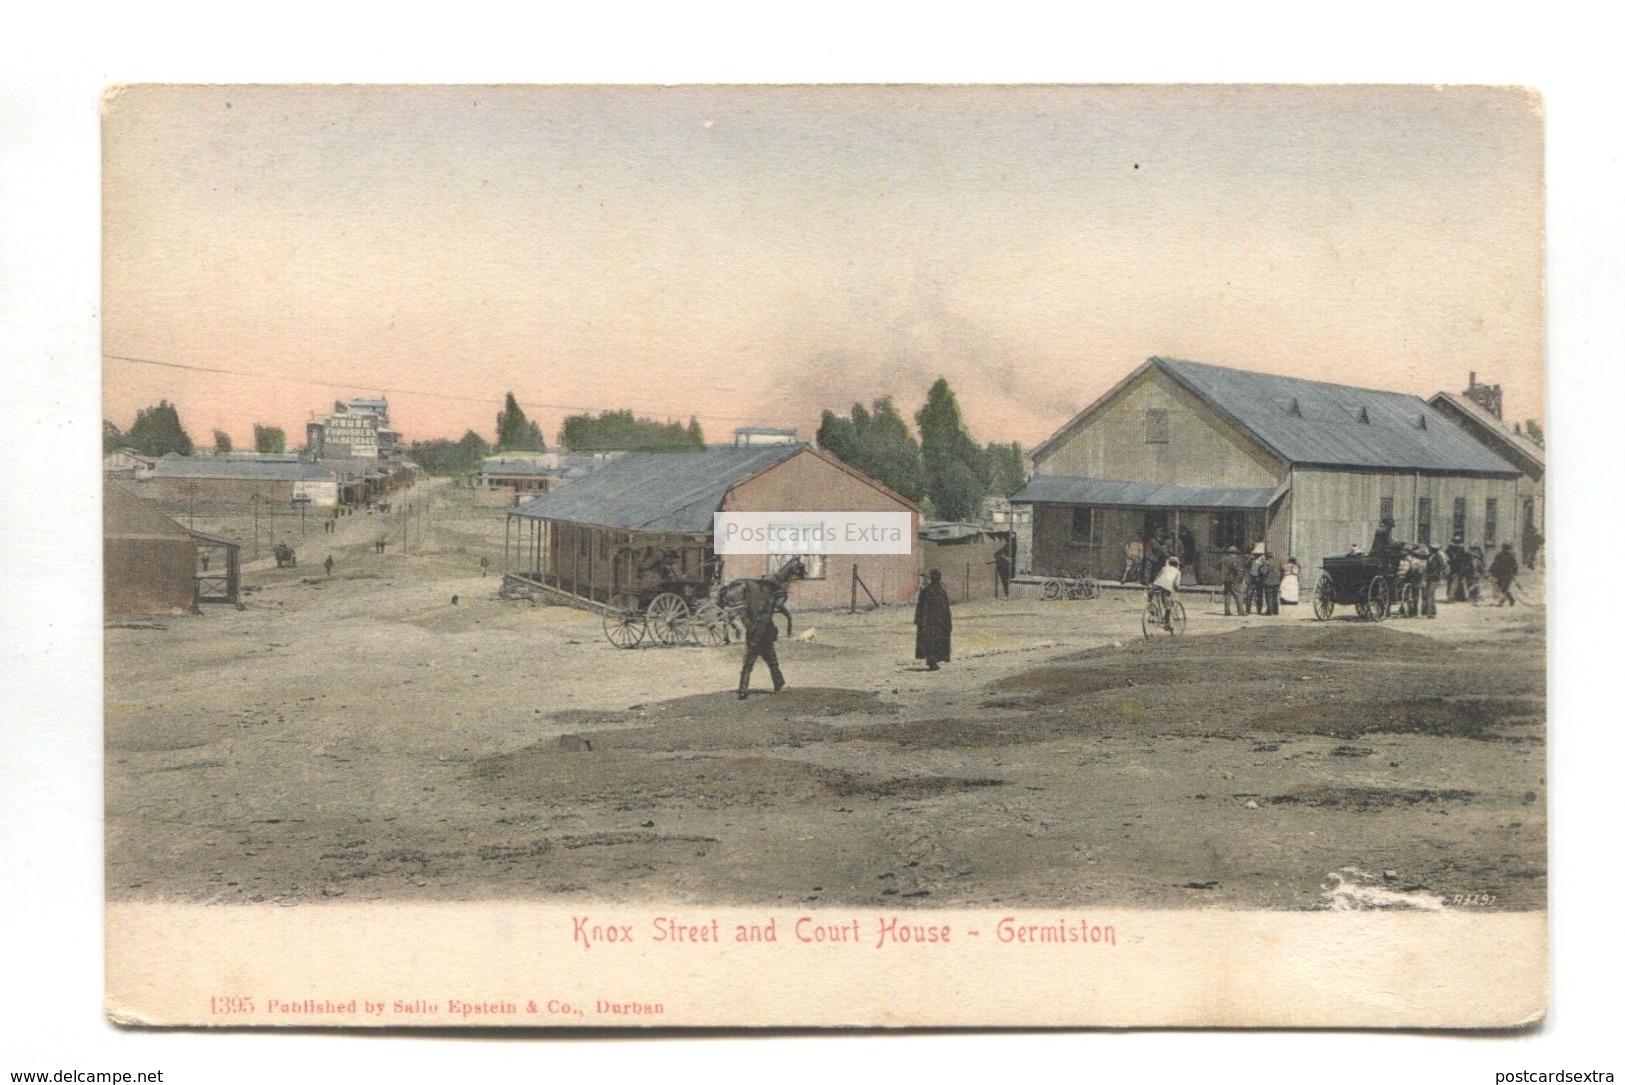 Germiston - Knox Street And Court House - Early South Africa Postcard - South Africa